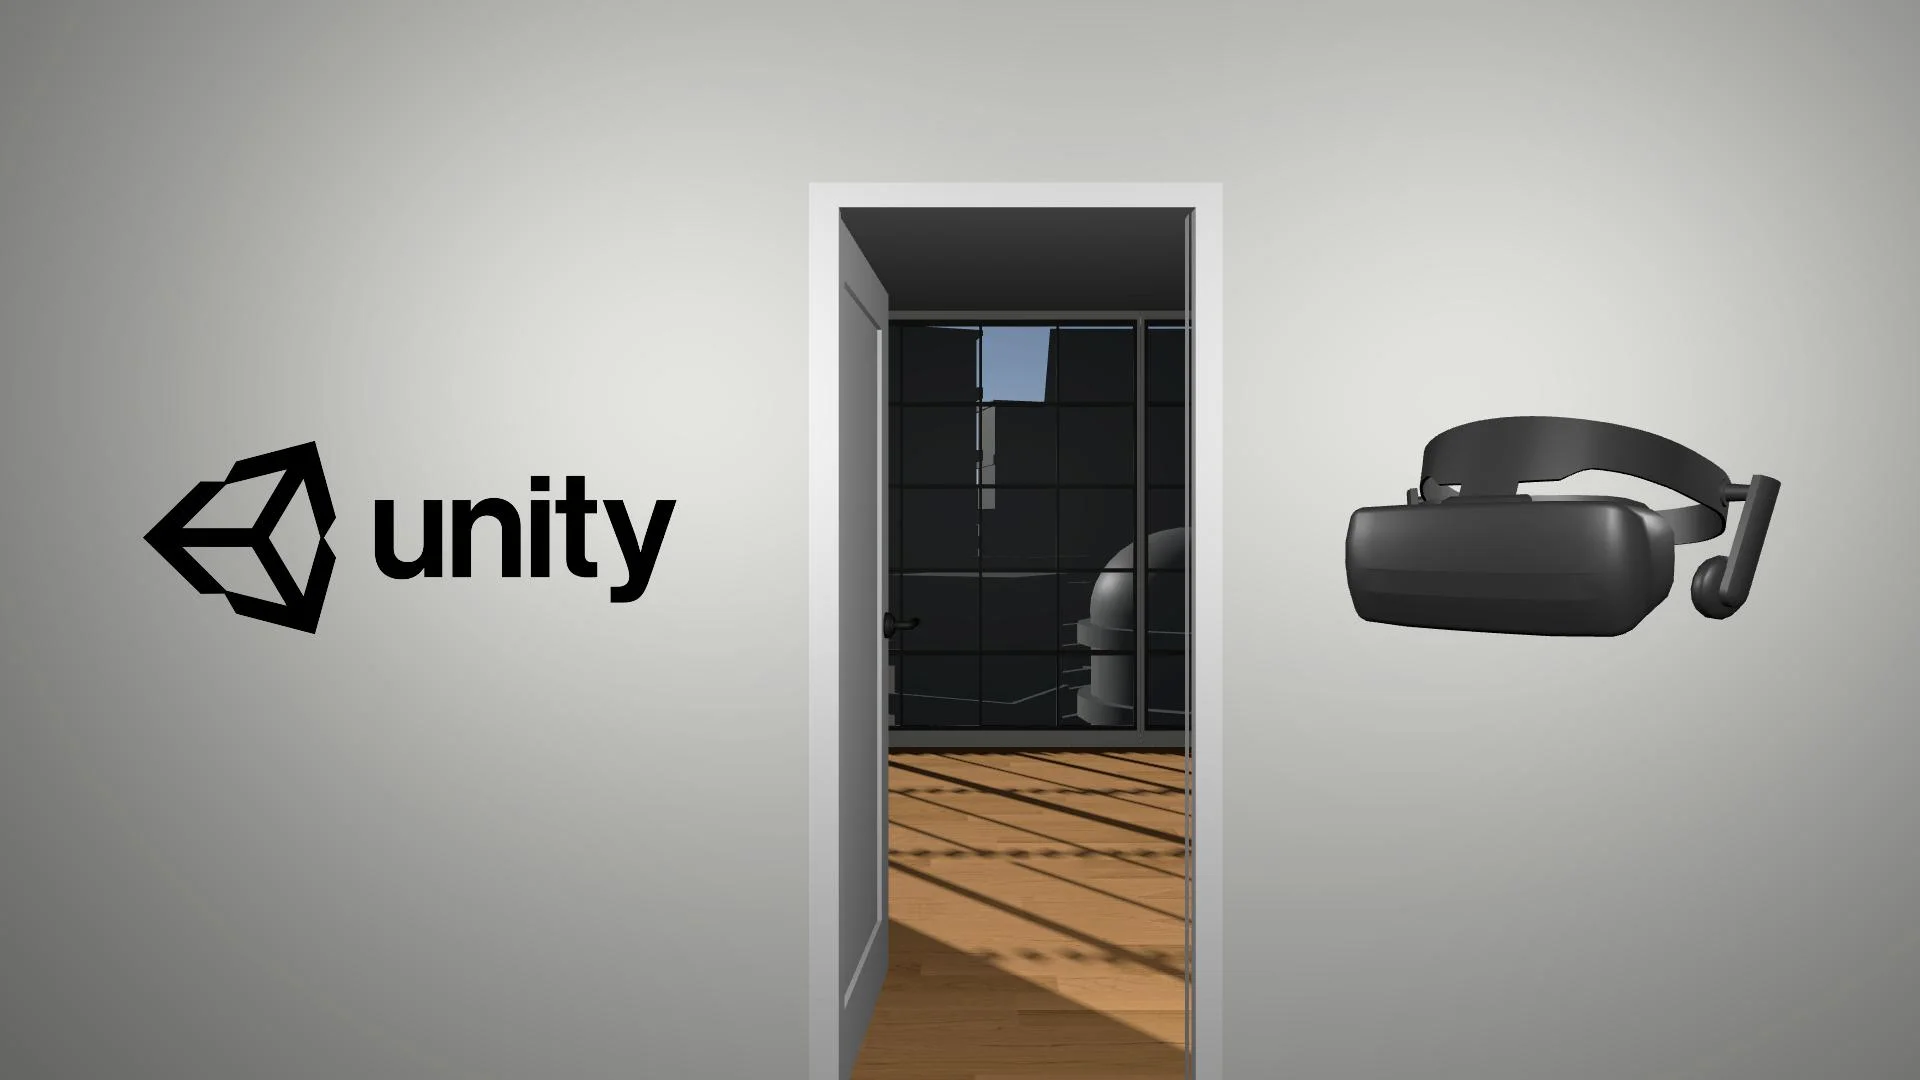 VR Games in Unity